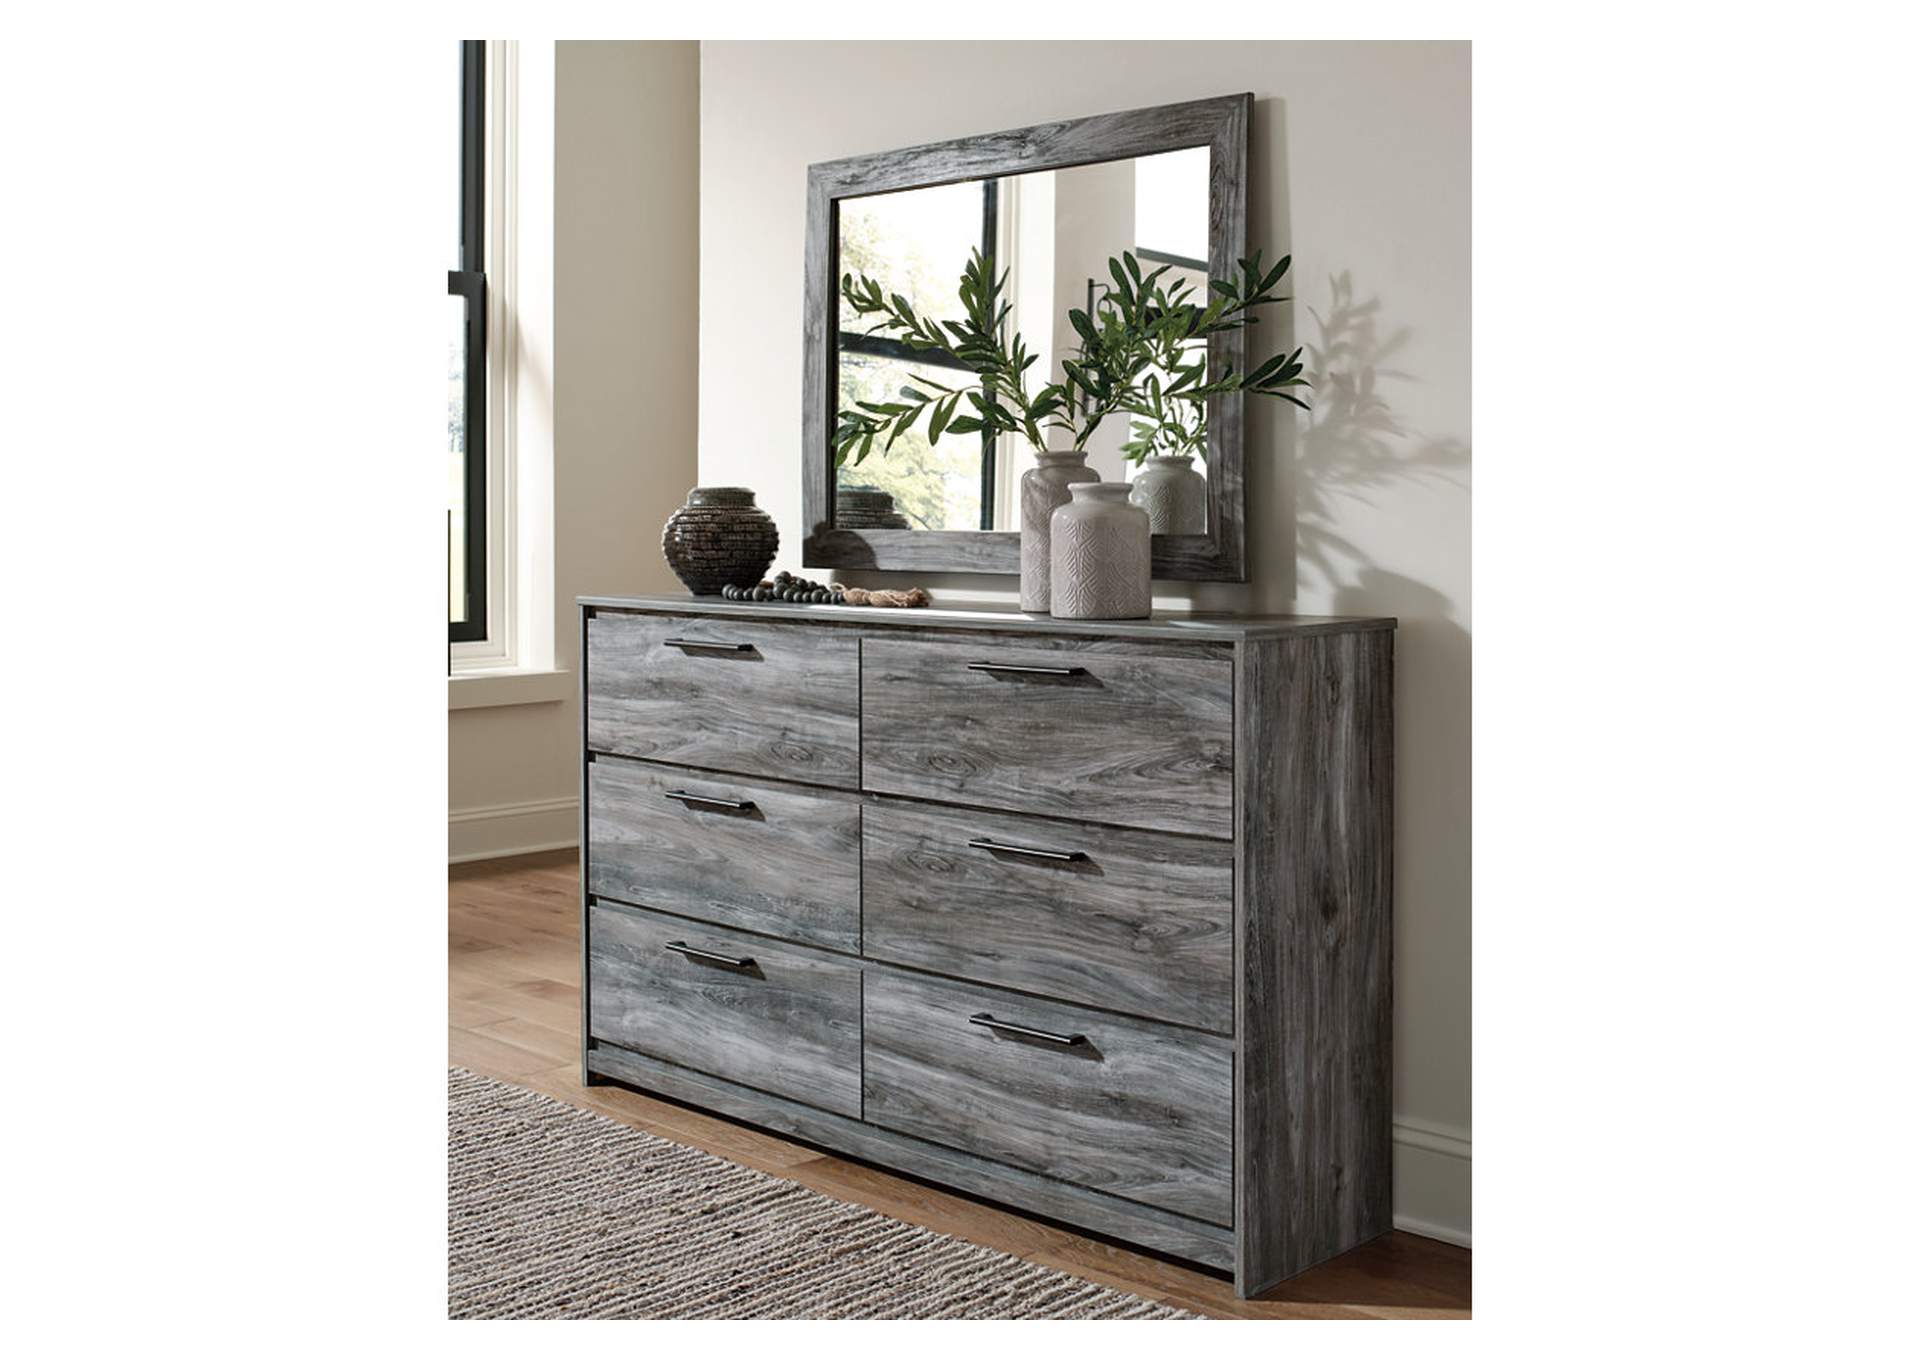 Baystorm King Panel Headboard with Mirrored Dresser, Chest and 2 Nightstands,Signature Design By Ashley